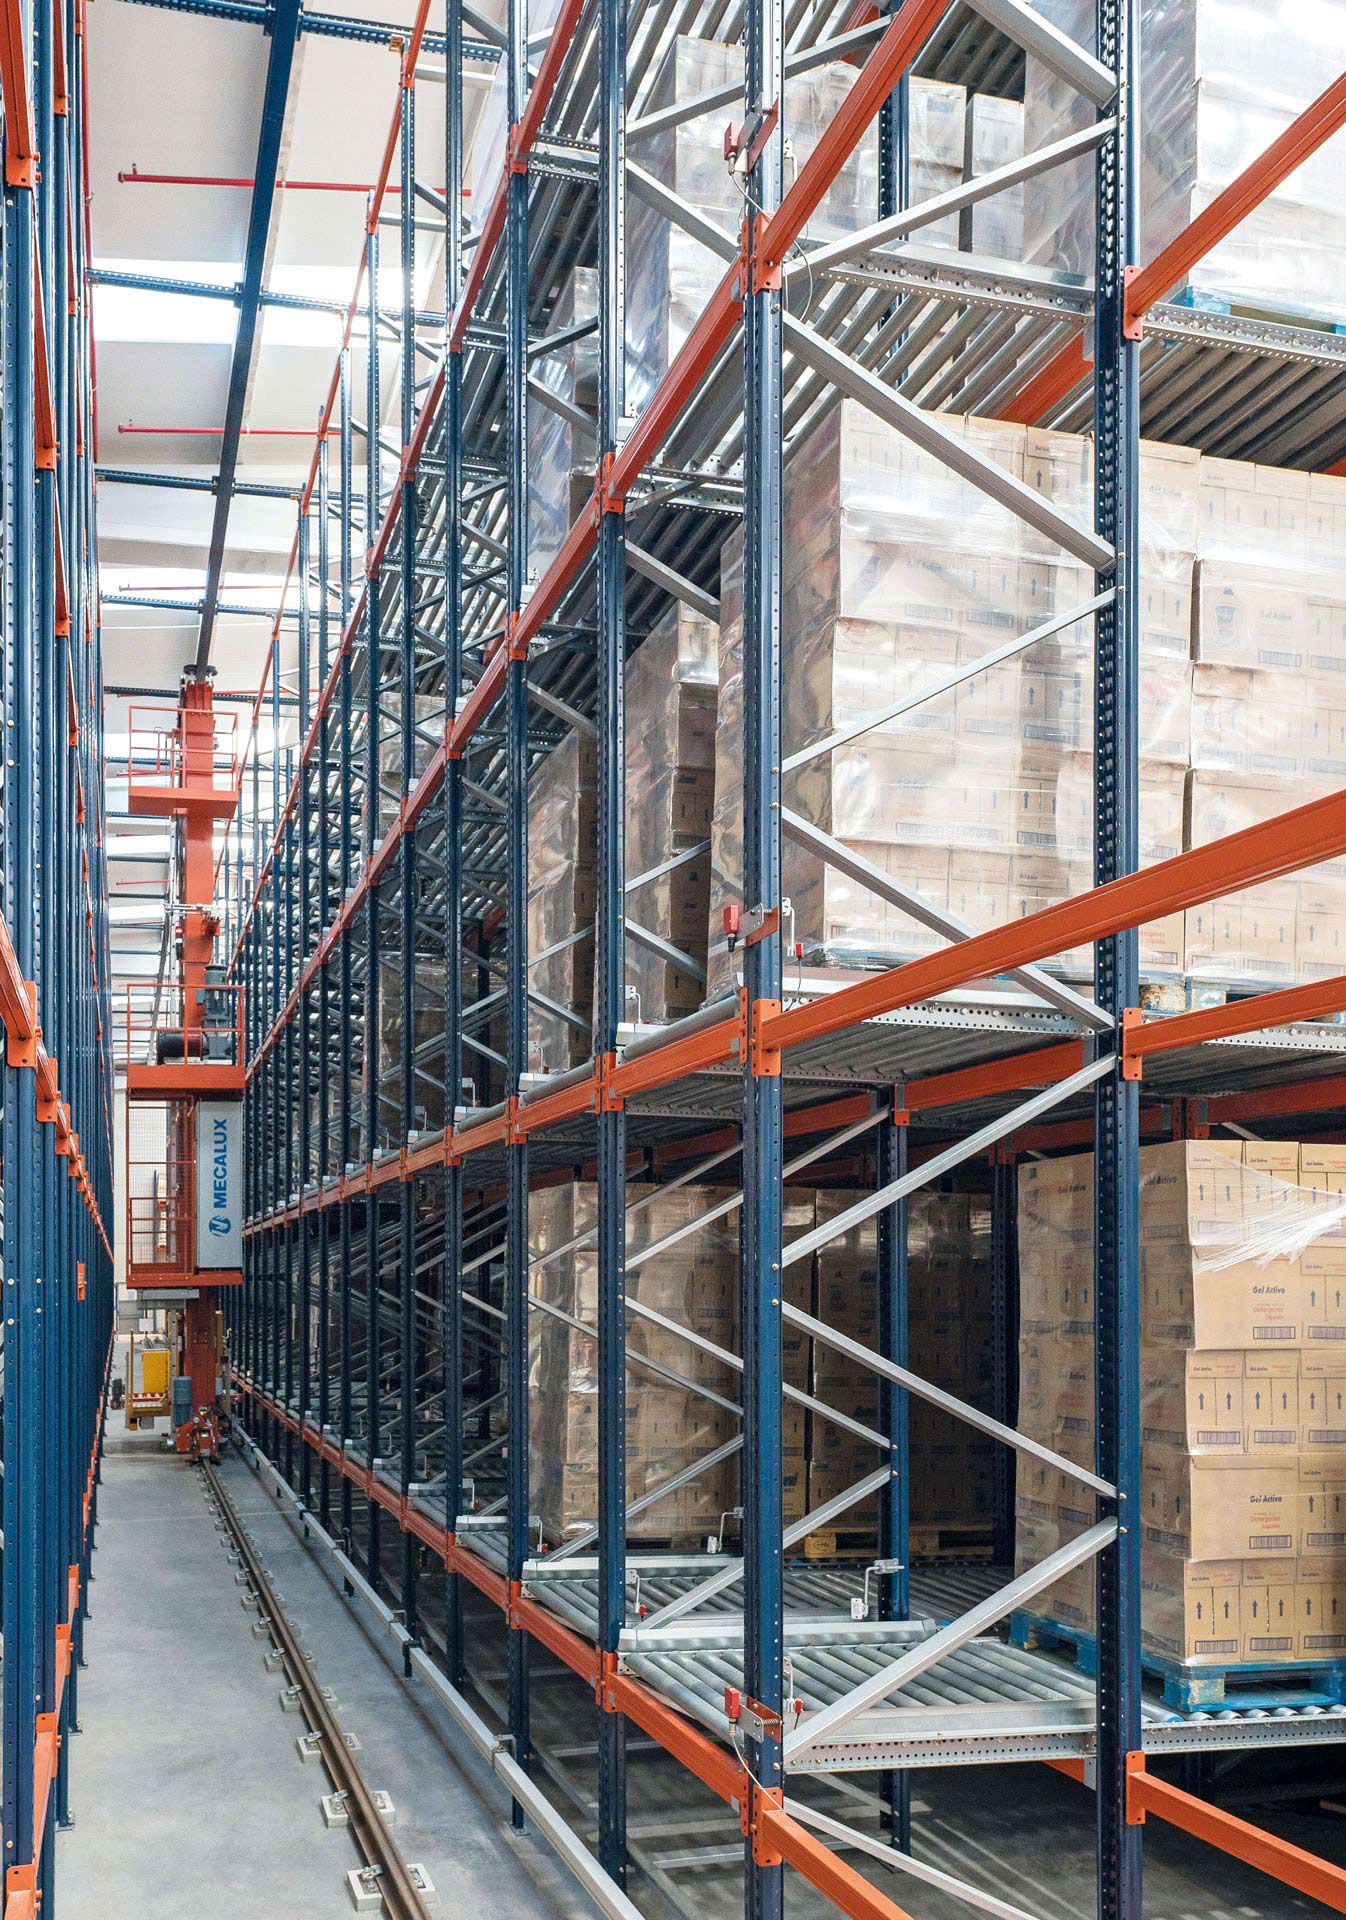 The combination of pallet flow racking and stacker cranes streamlines the storage and retrieval of goods